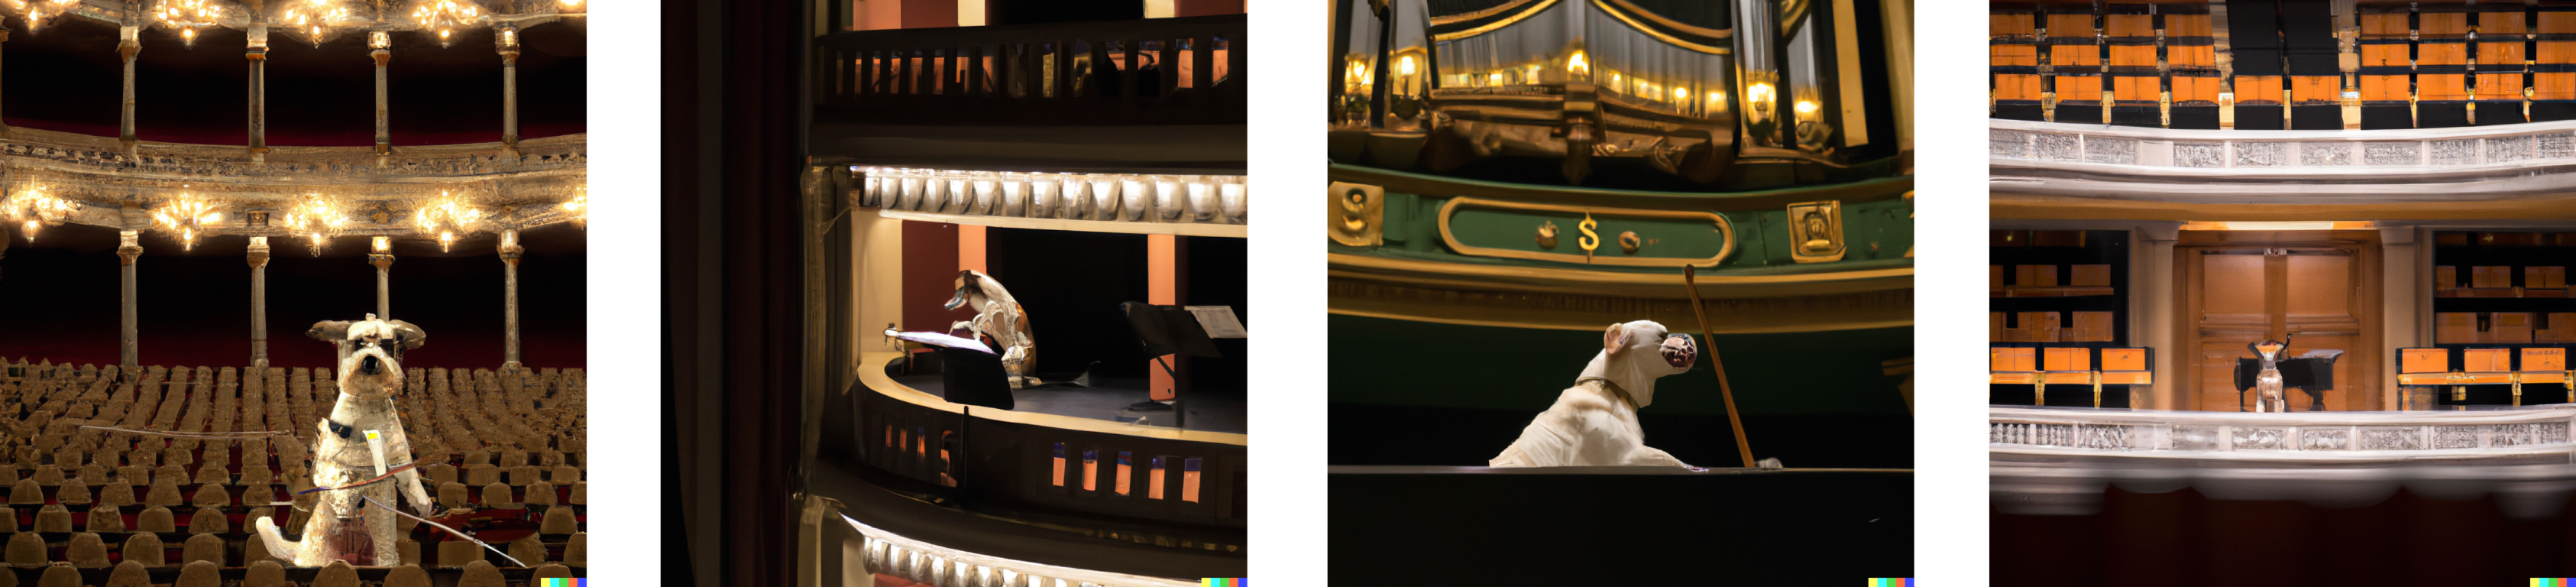 Images generated with Dall-E 2 on the caption &lsquo;A dog playing music in an opera house&rsquo;.